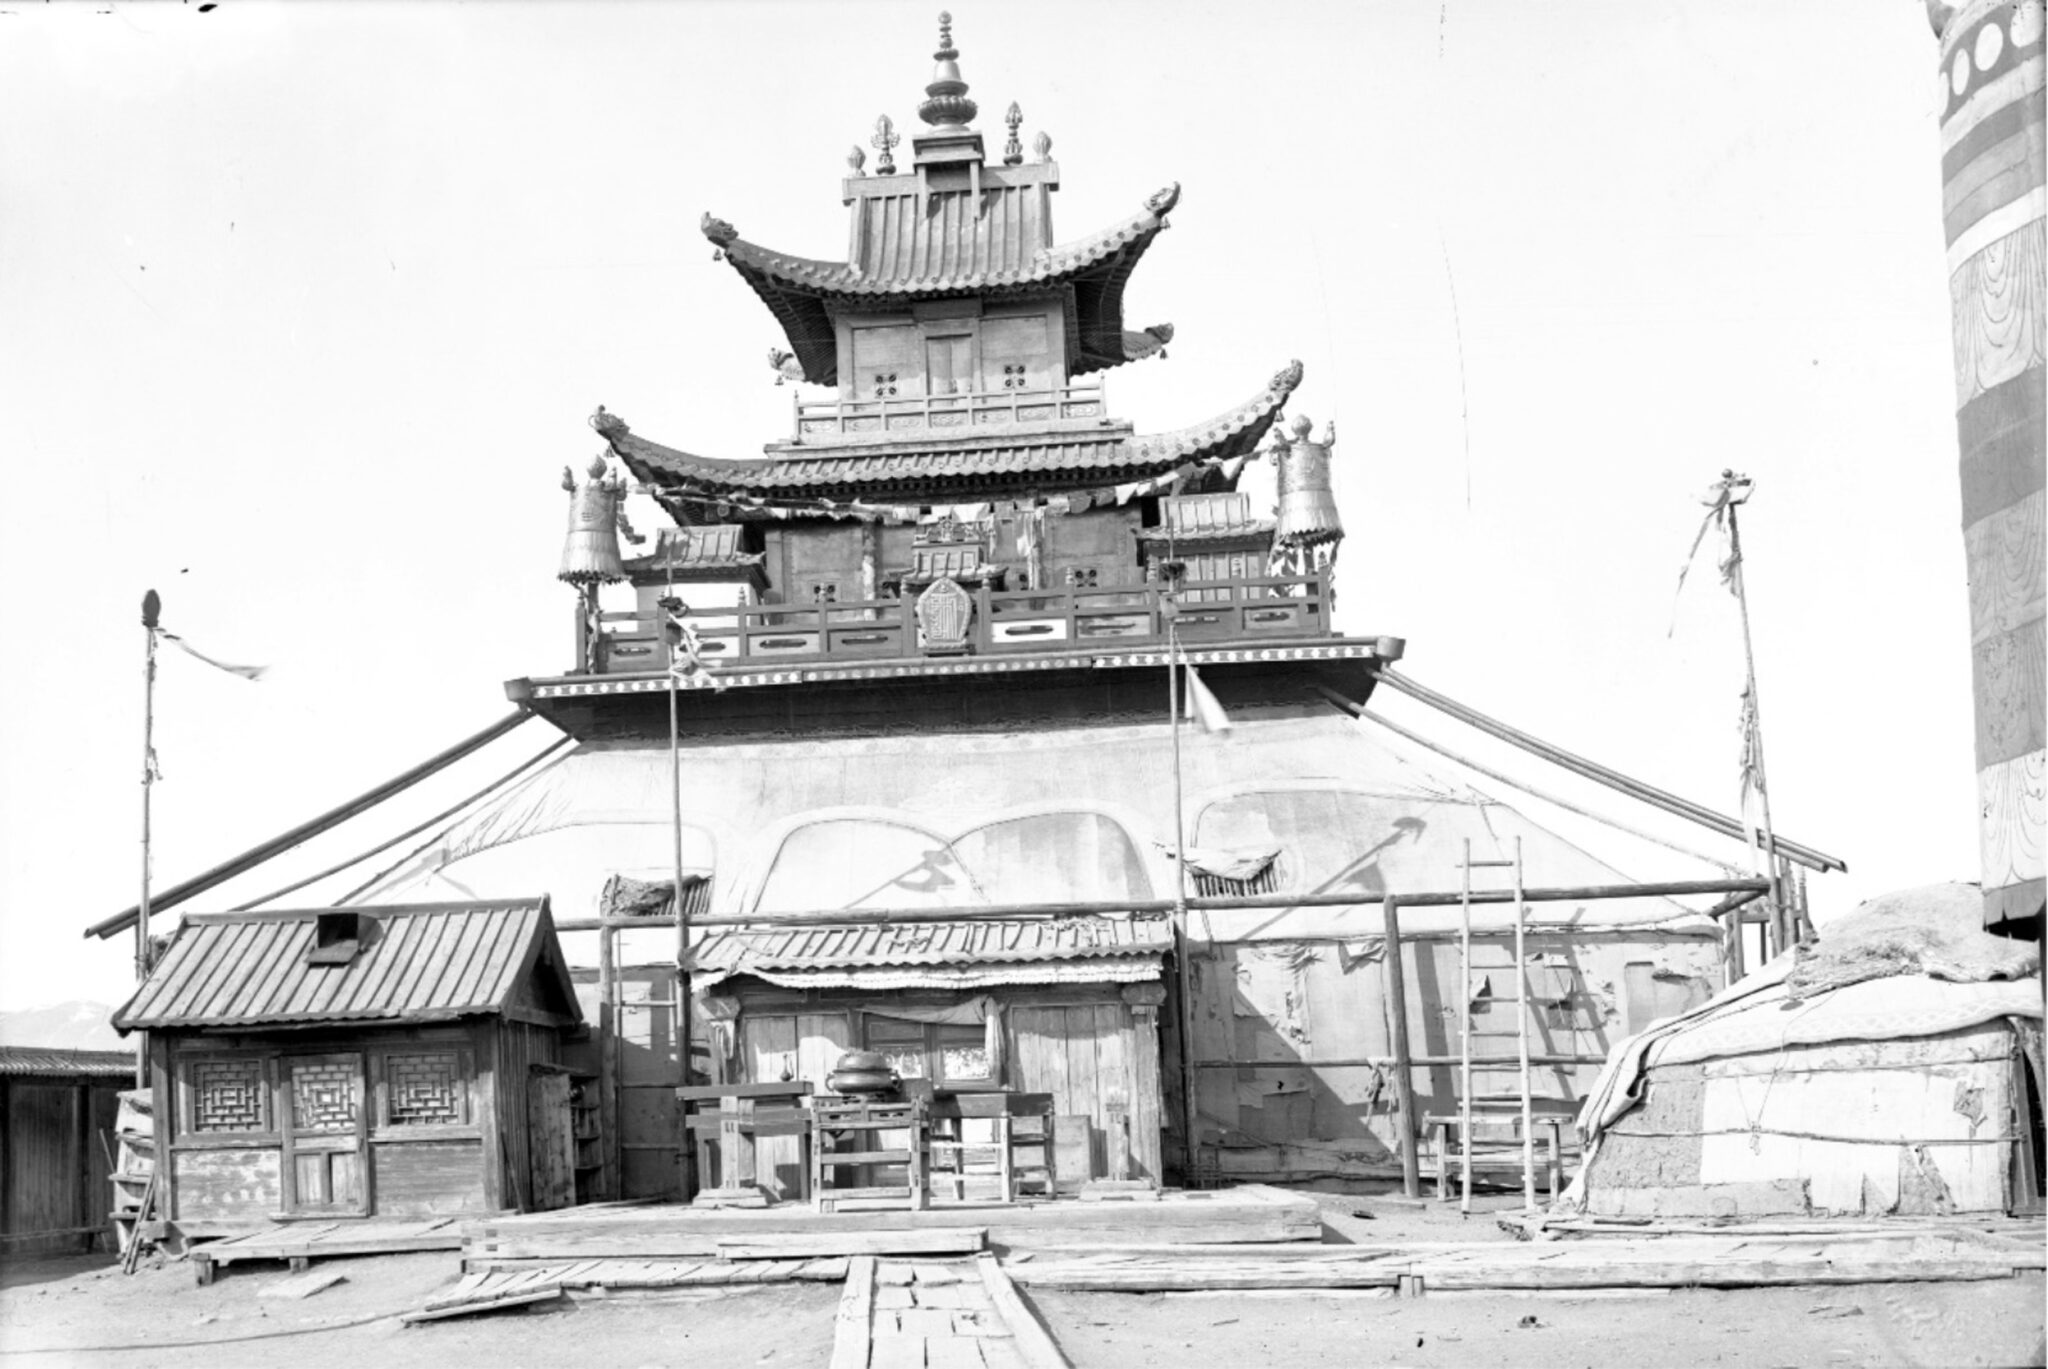 Black and white photograph of three-story temple with broad base, pagoda roofs, and ornate balustrades and finials